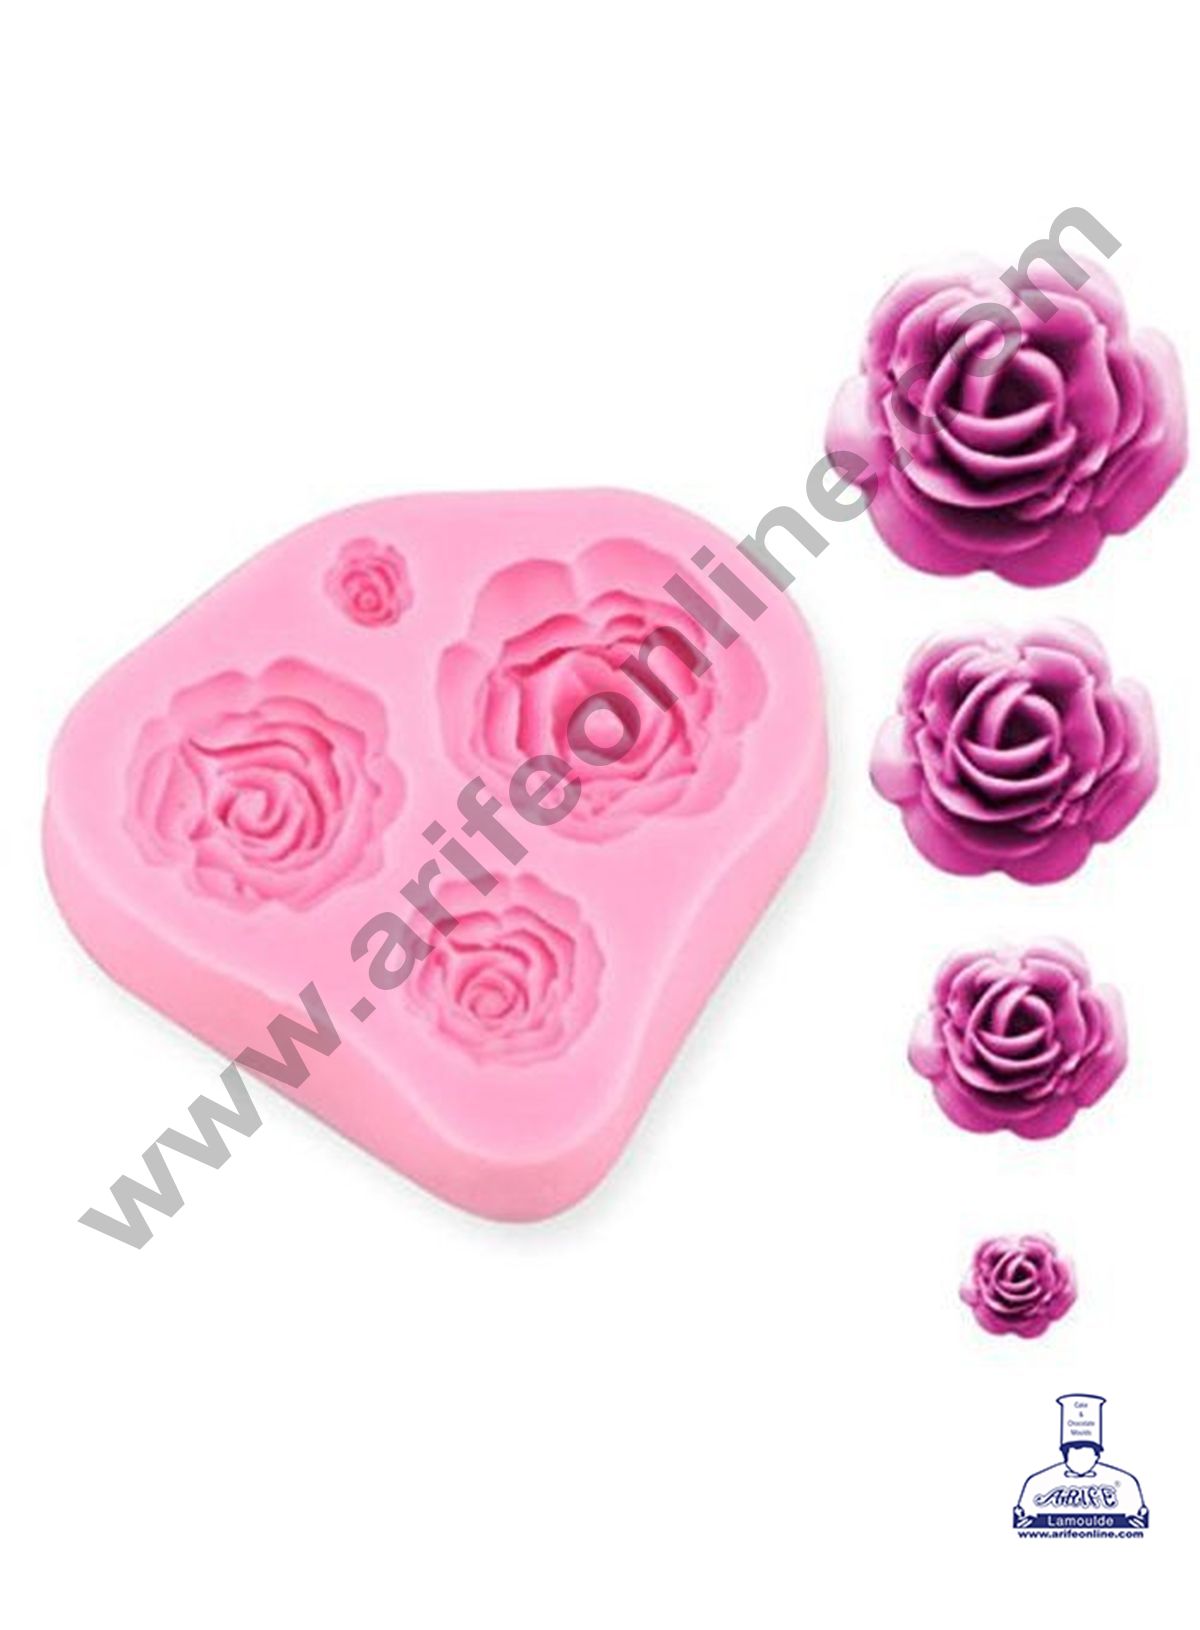 Valentine's Day Rose Flower Cake Mold Rose Shape Non-Stick Baking Molds  Trays For Chocolate Cake Sugar Jelly Pudding Mould Candy Making Baked Tool  : Amazon.ae: Kitchen